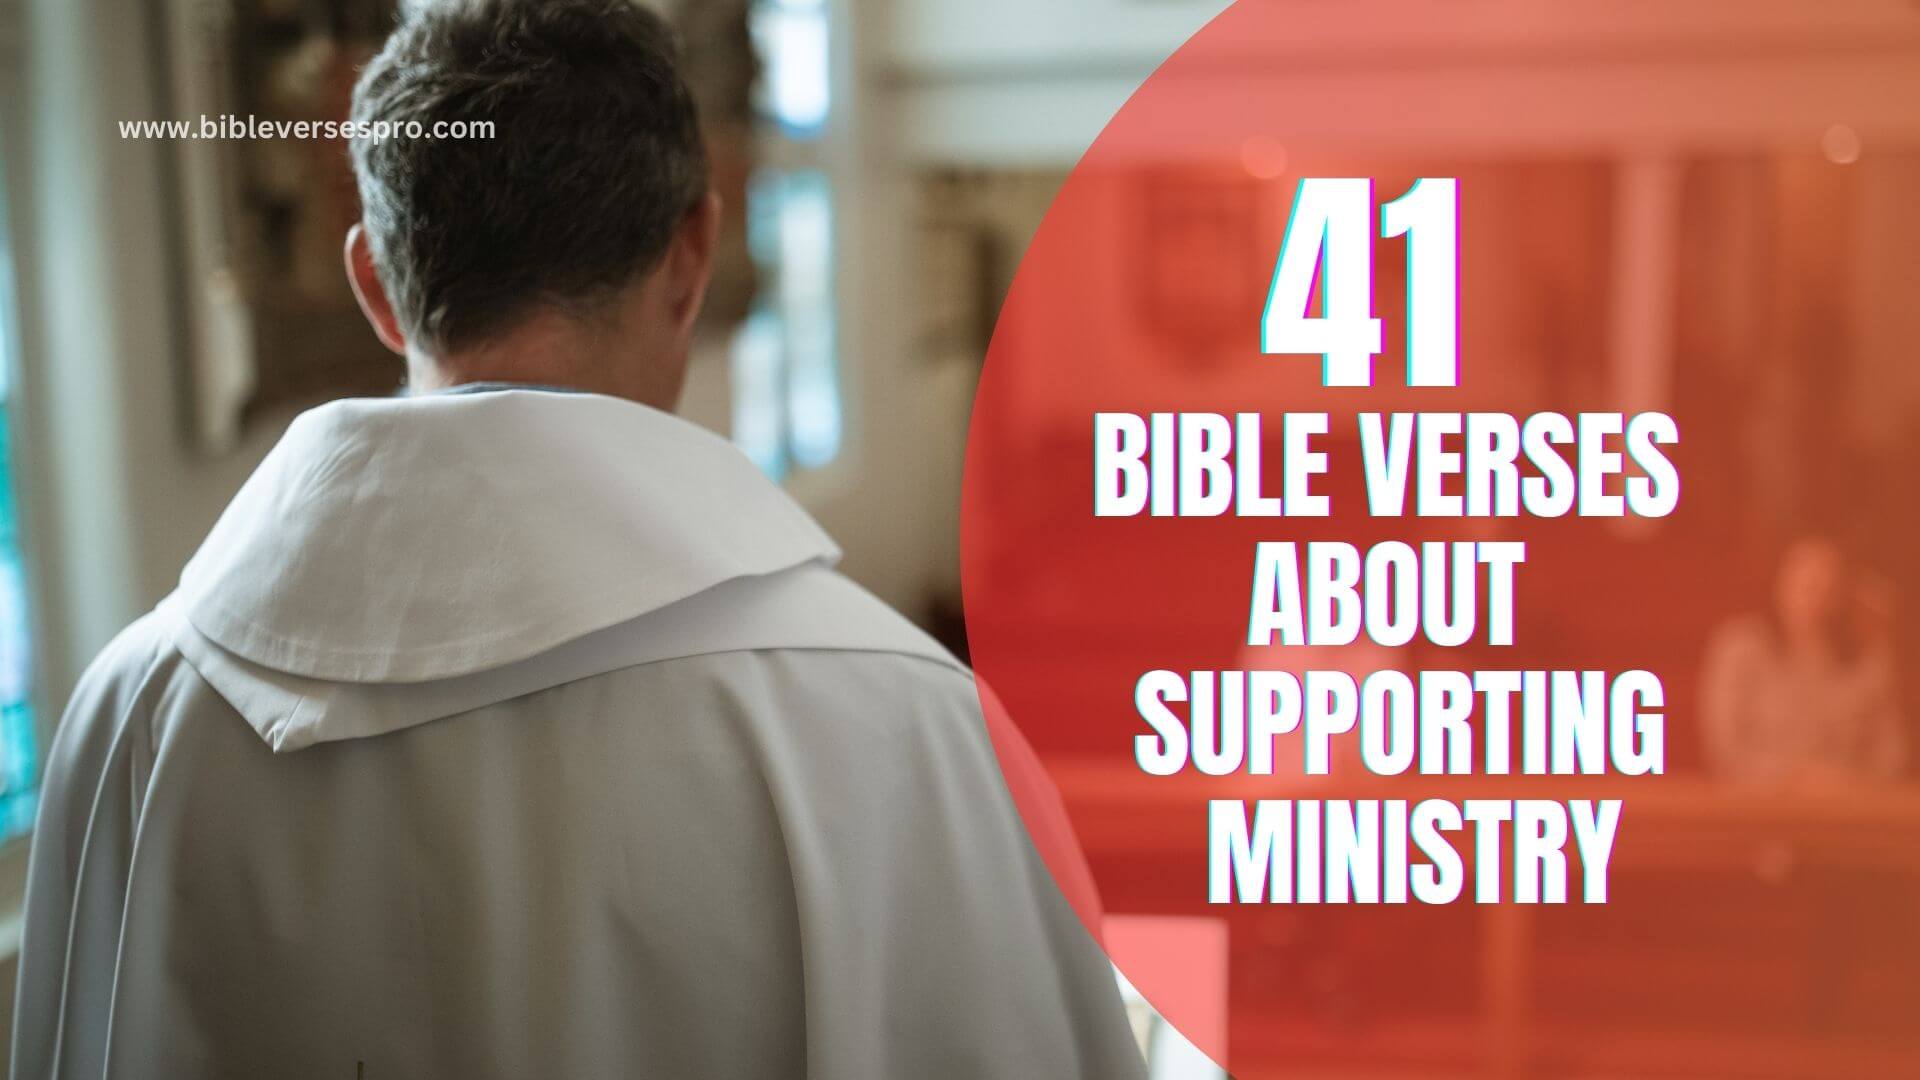 BIBLE VERSES ABOUT SUPPORTING MINISTRY (1)